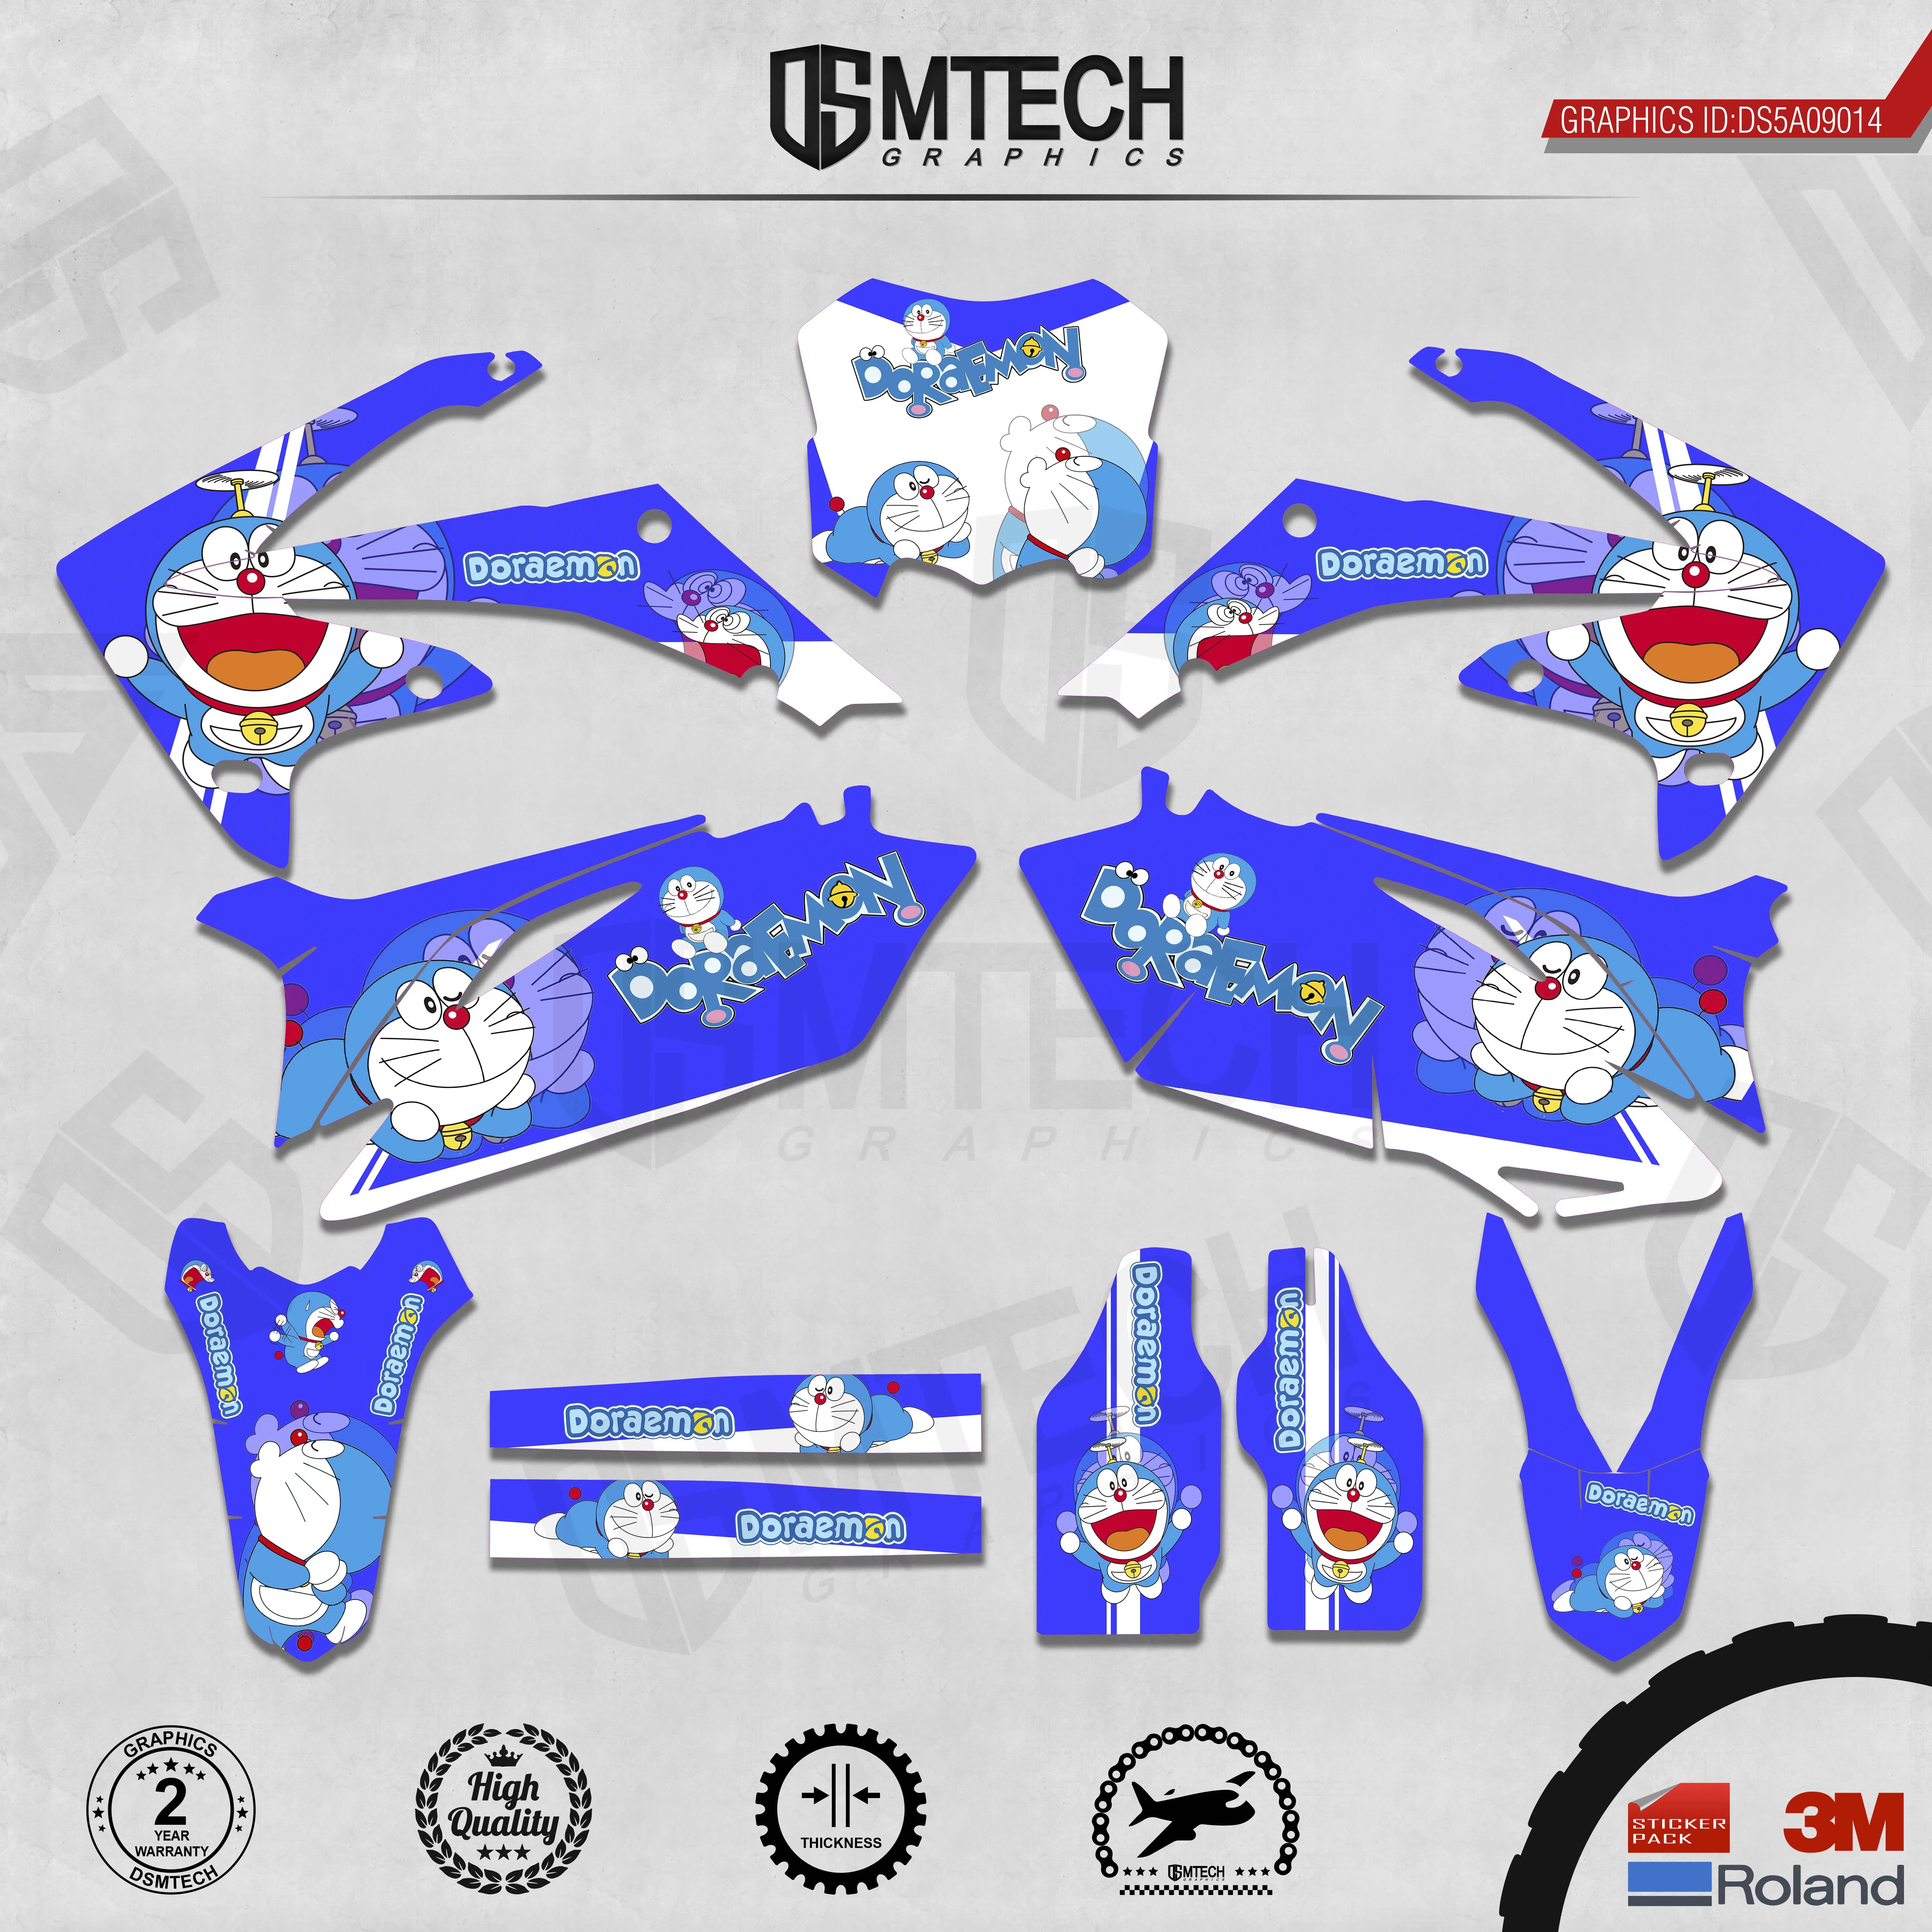 

DSMTECH Customized Team Graphics Backgrounds Decals 3M Custom Stickers For 2010-2013 CRF250R 2009-2012 CRF450R 014